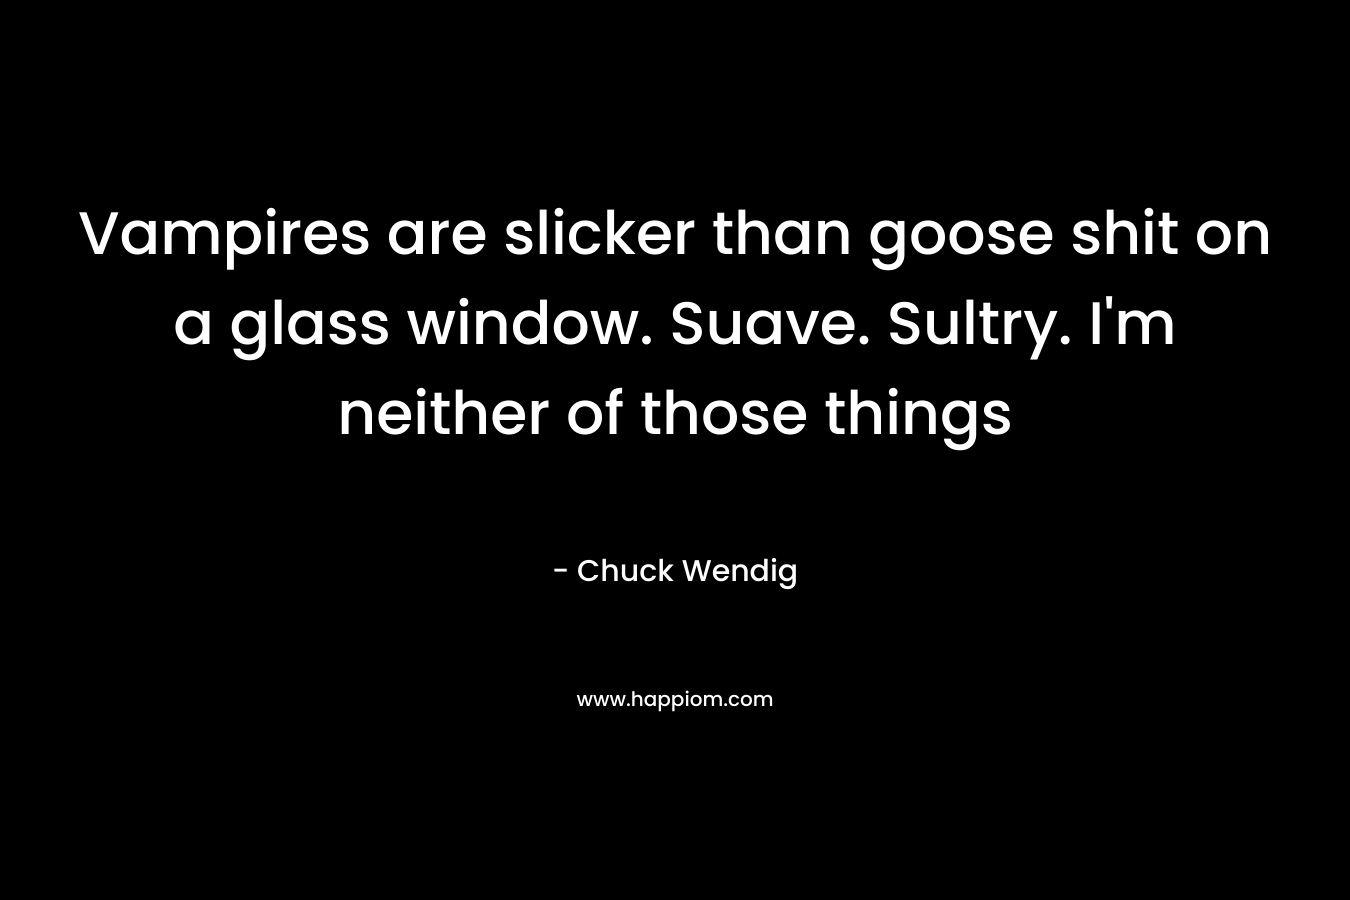 Vampires are slicker than goose shit on a glass window. Suave. Sultry. I’m neither of those things – Chuck Wendig